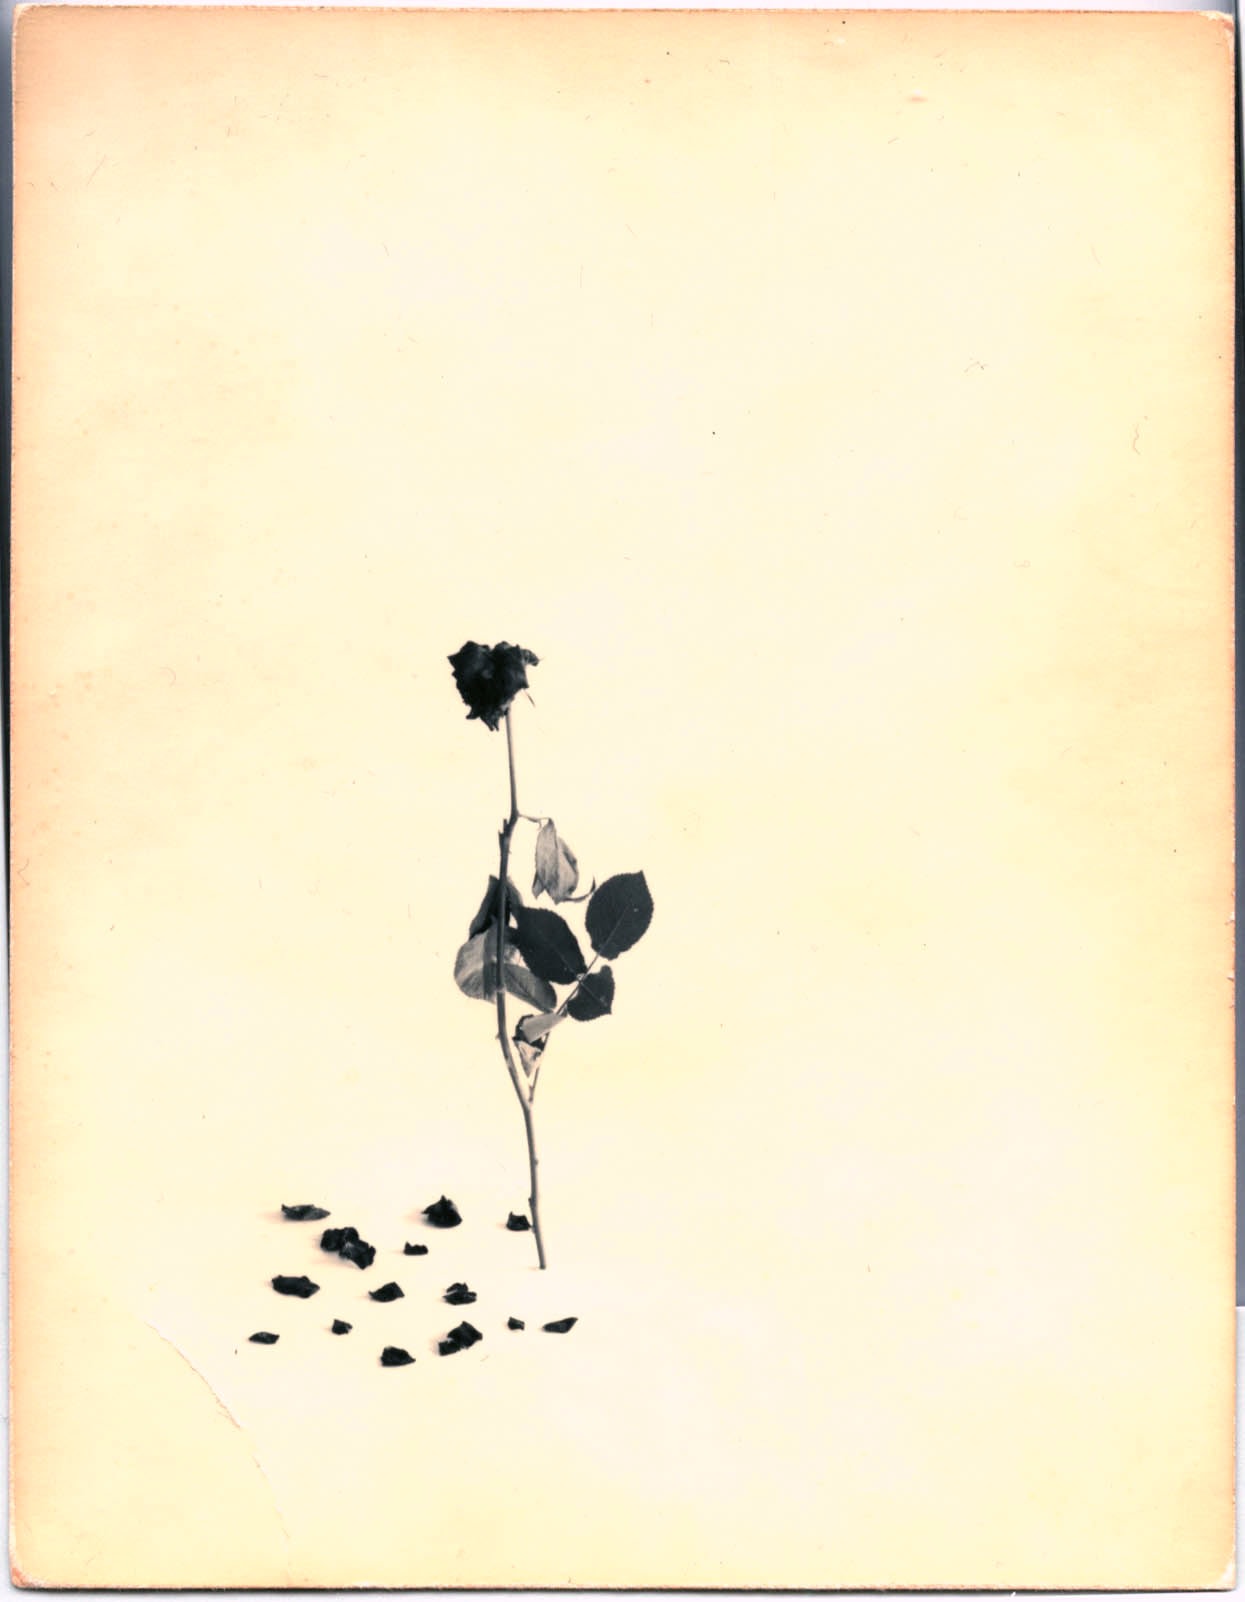 Masao Yamamoto,&nbsp;Untitled #44&nbsp;from the series&nbsp;A Box of Ku. Hand-toned gelatin silver print with paint,, 5 1/4 x 4 1/4 inches.&nbsp;